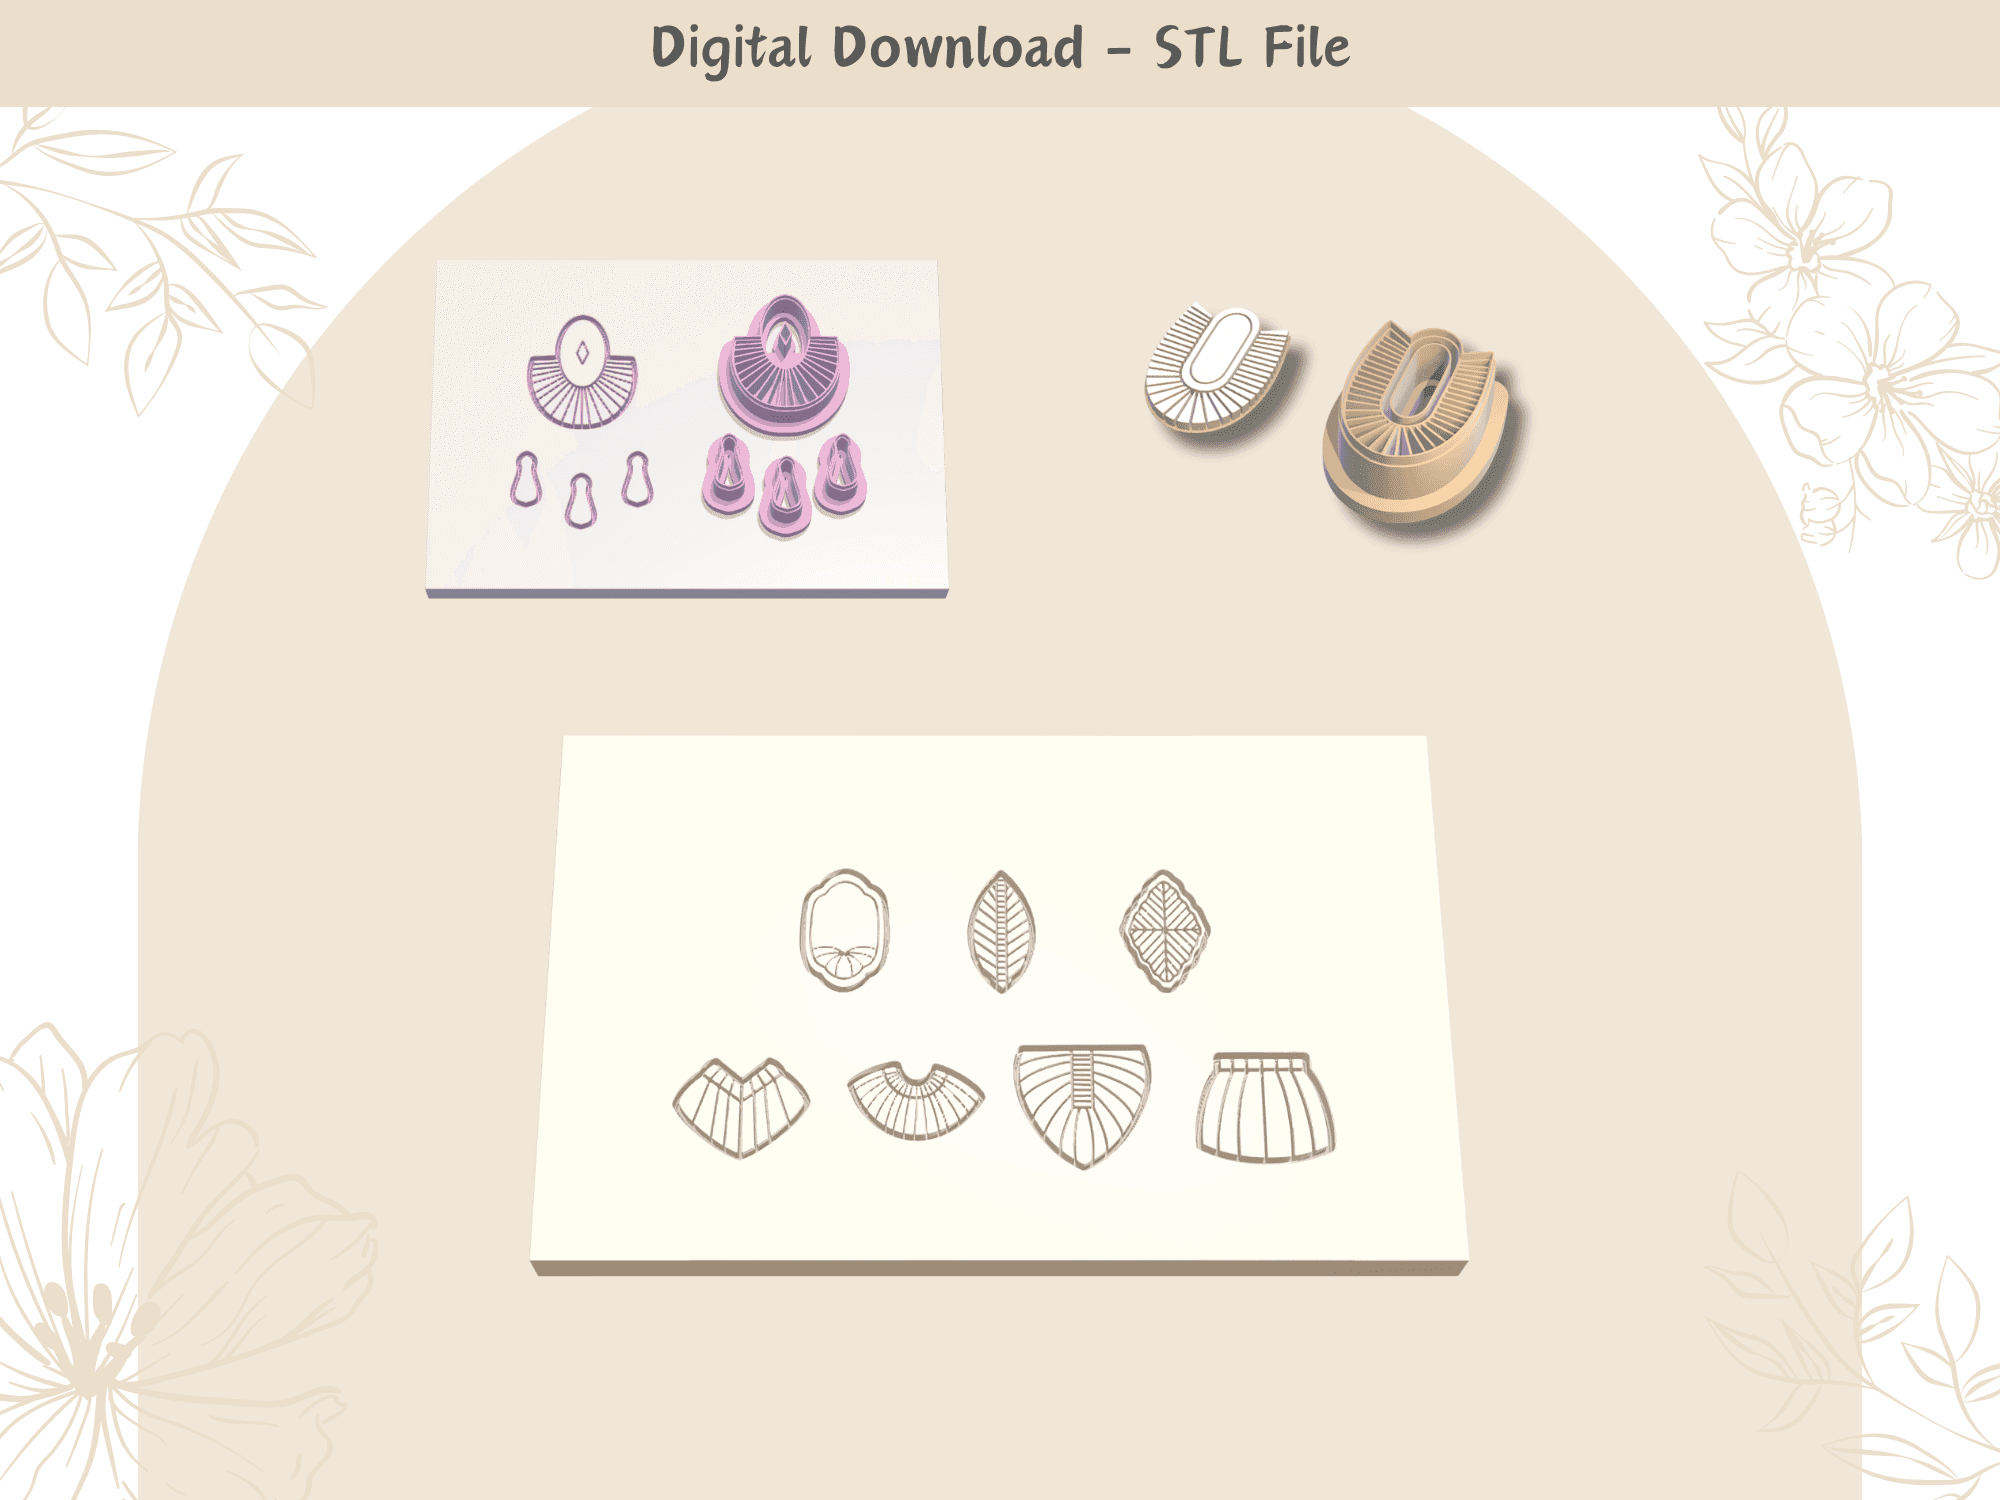 16 Tribal Style Earrings Clay Cutter Bundle Digital STL File for Polymer Clay | 95 Clay Cutters 3d model